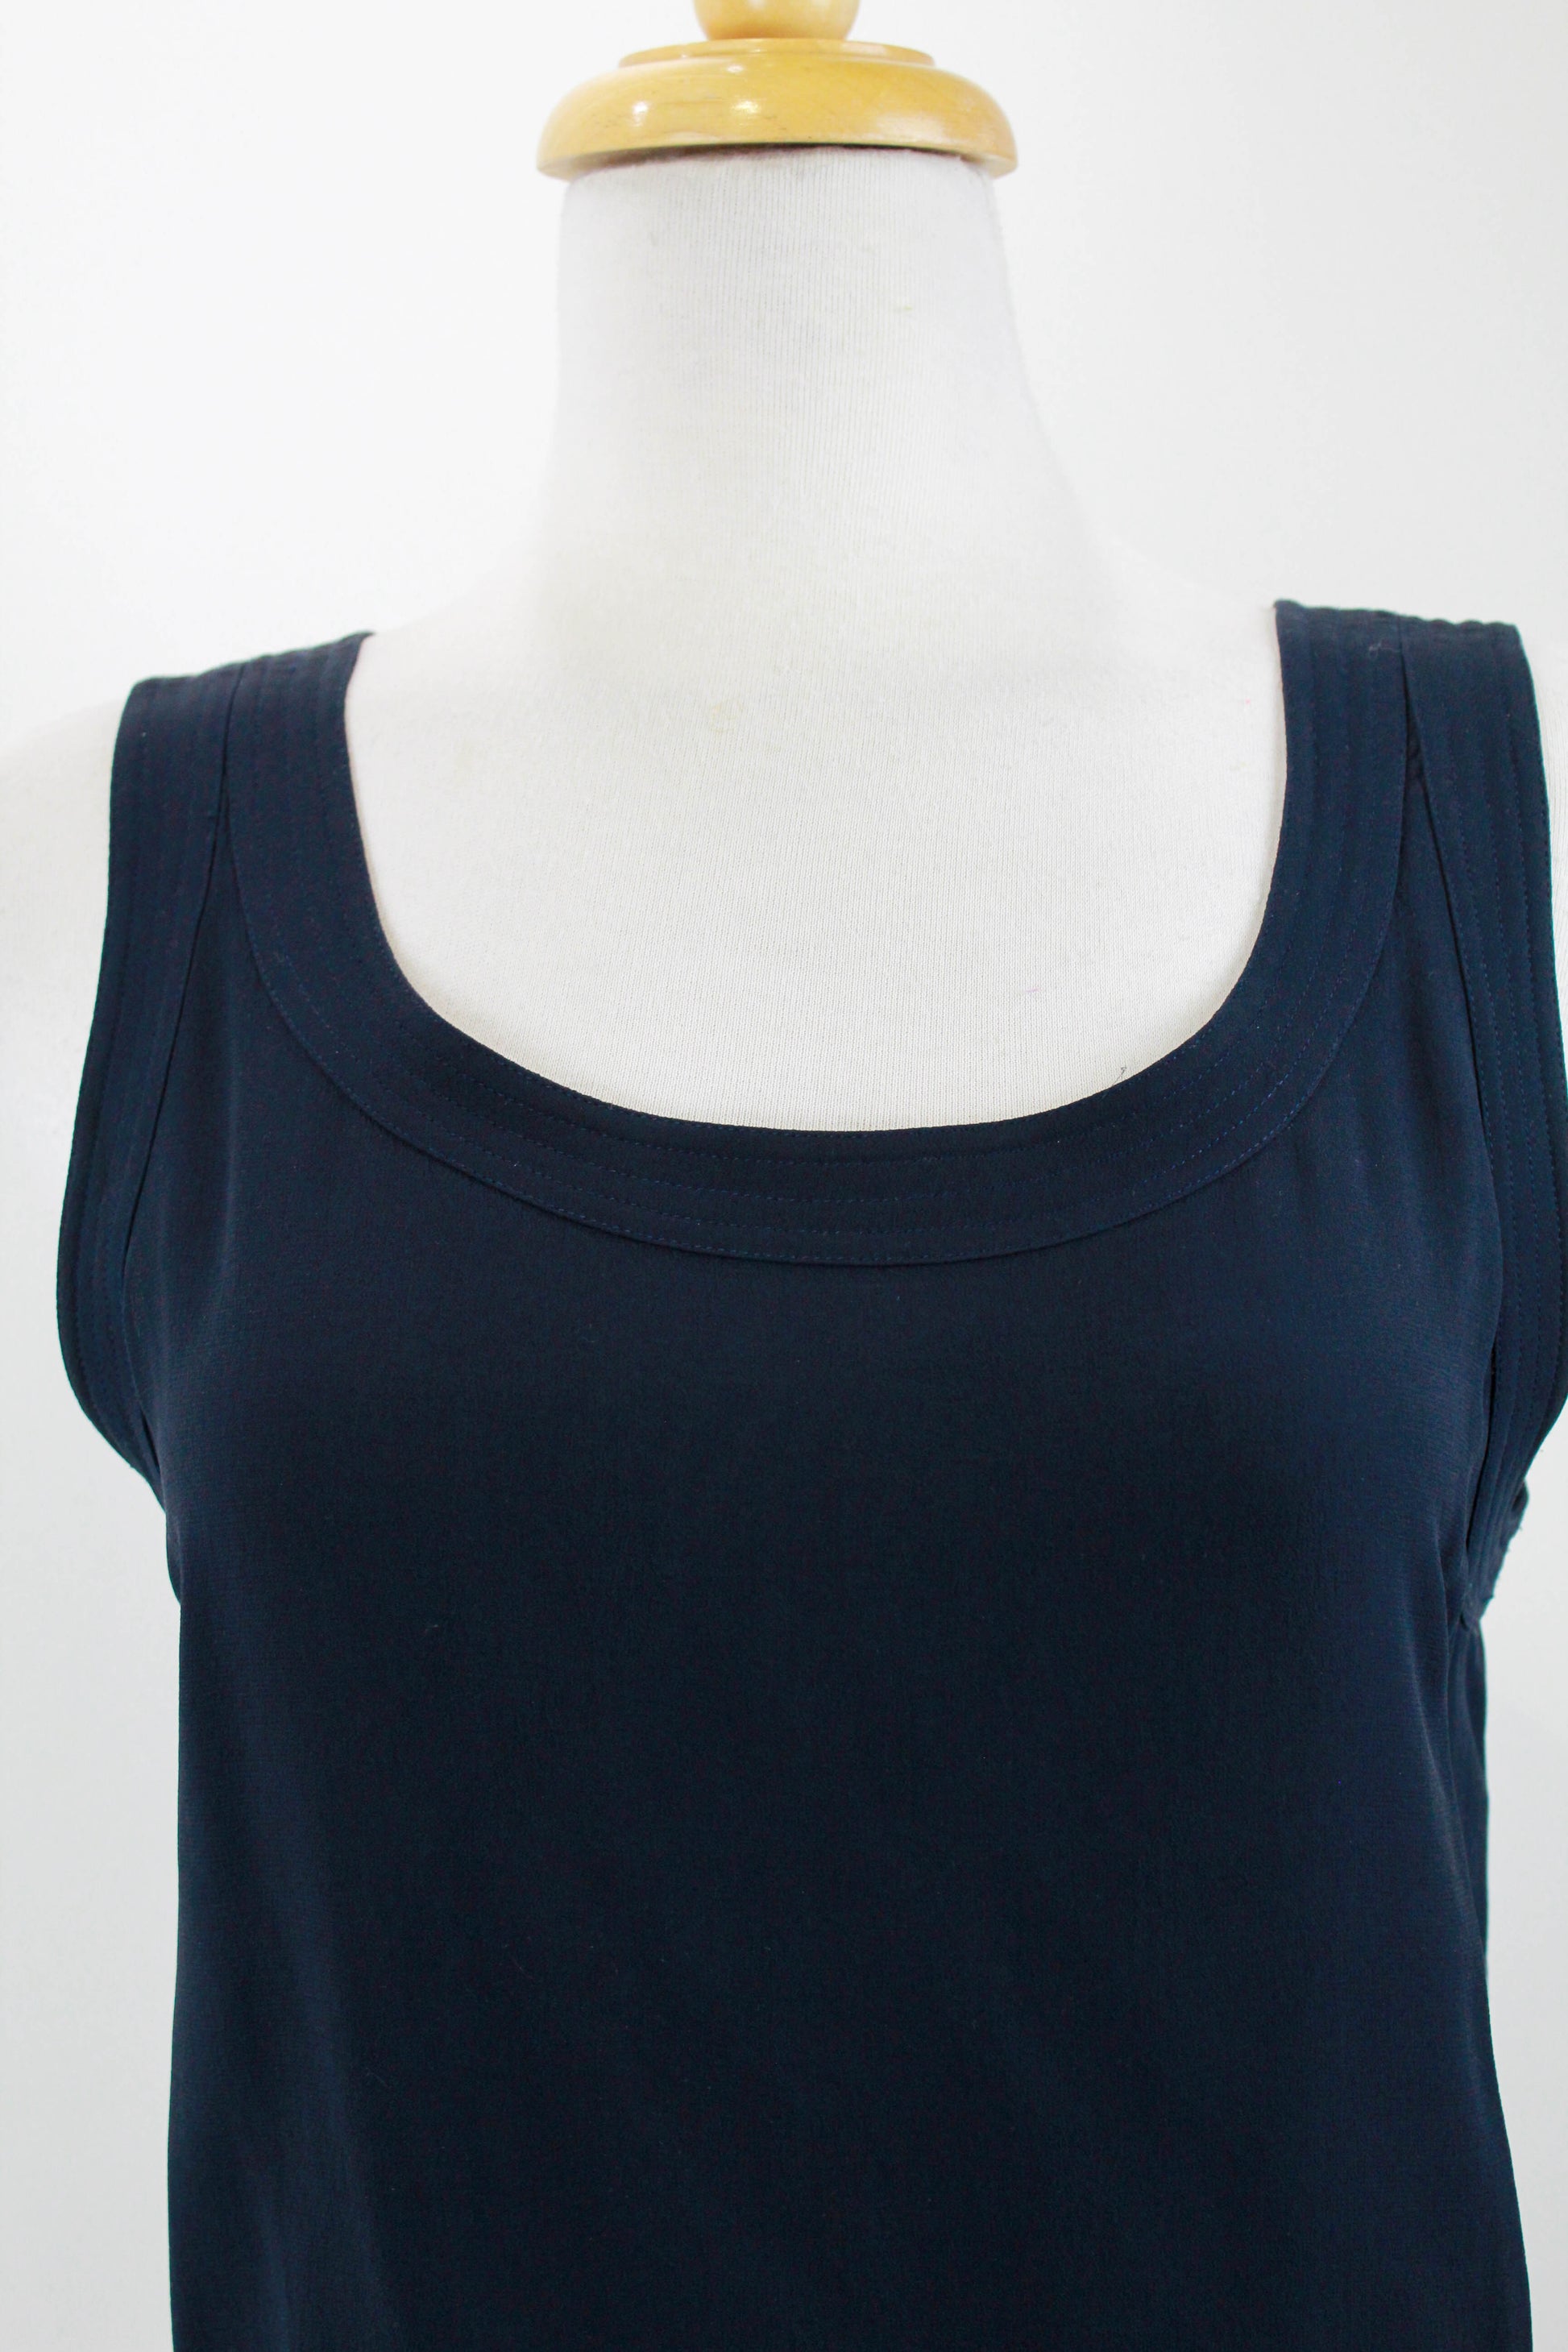 90s chanel boutique navy blue silk sleeveless shell top/blouse with scoop neck, logo button closure at back neck